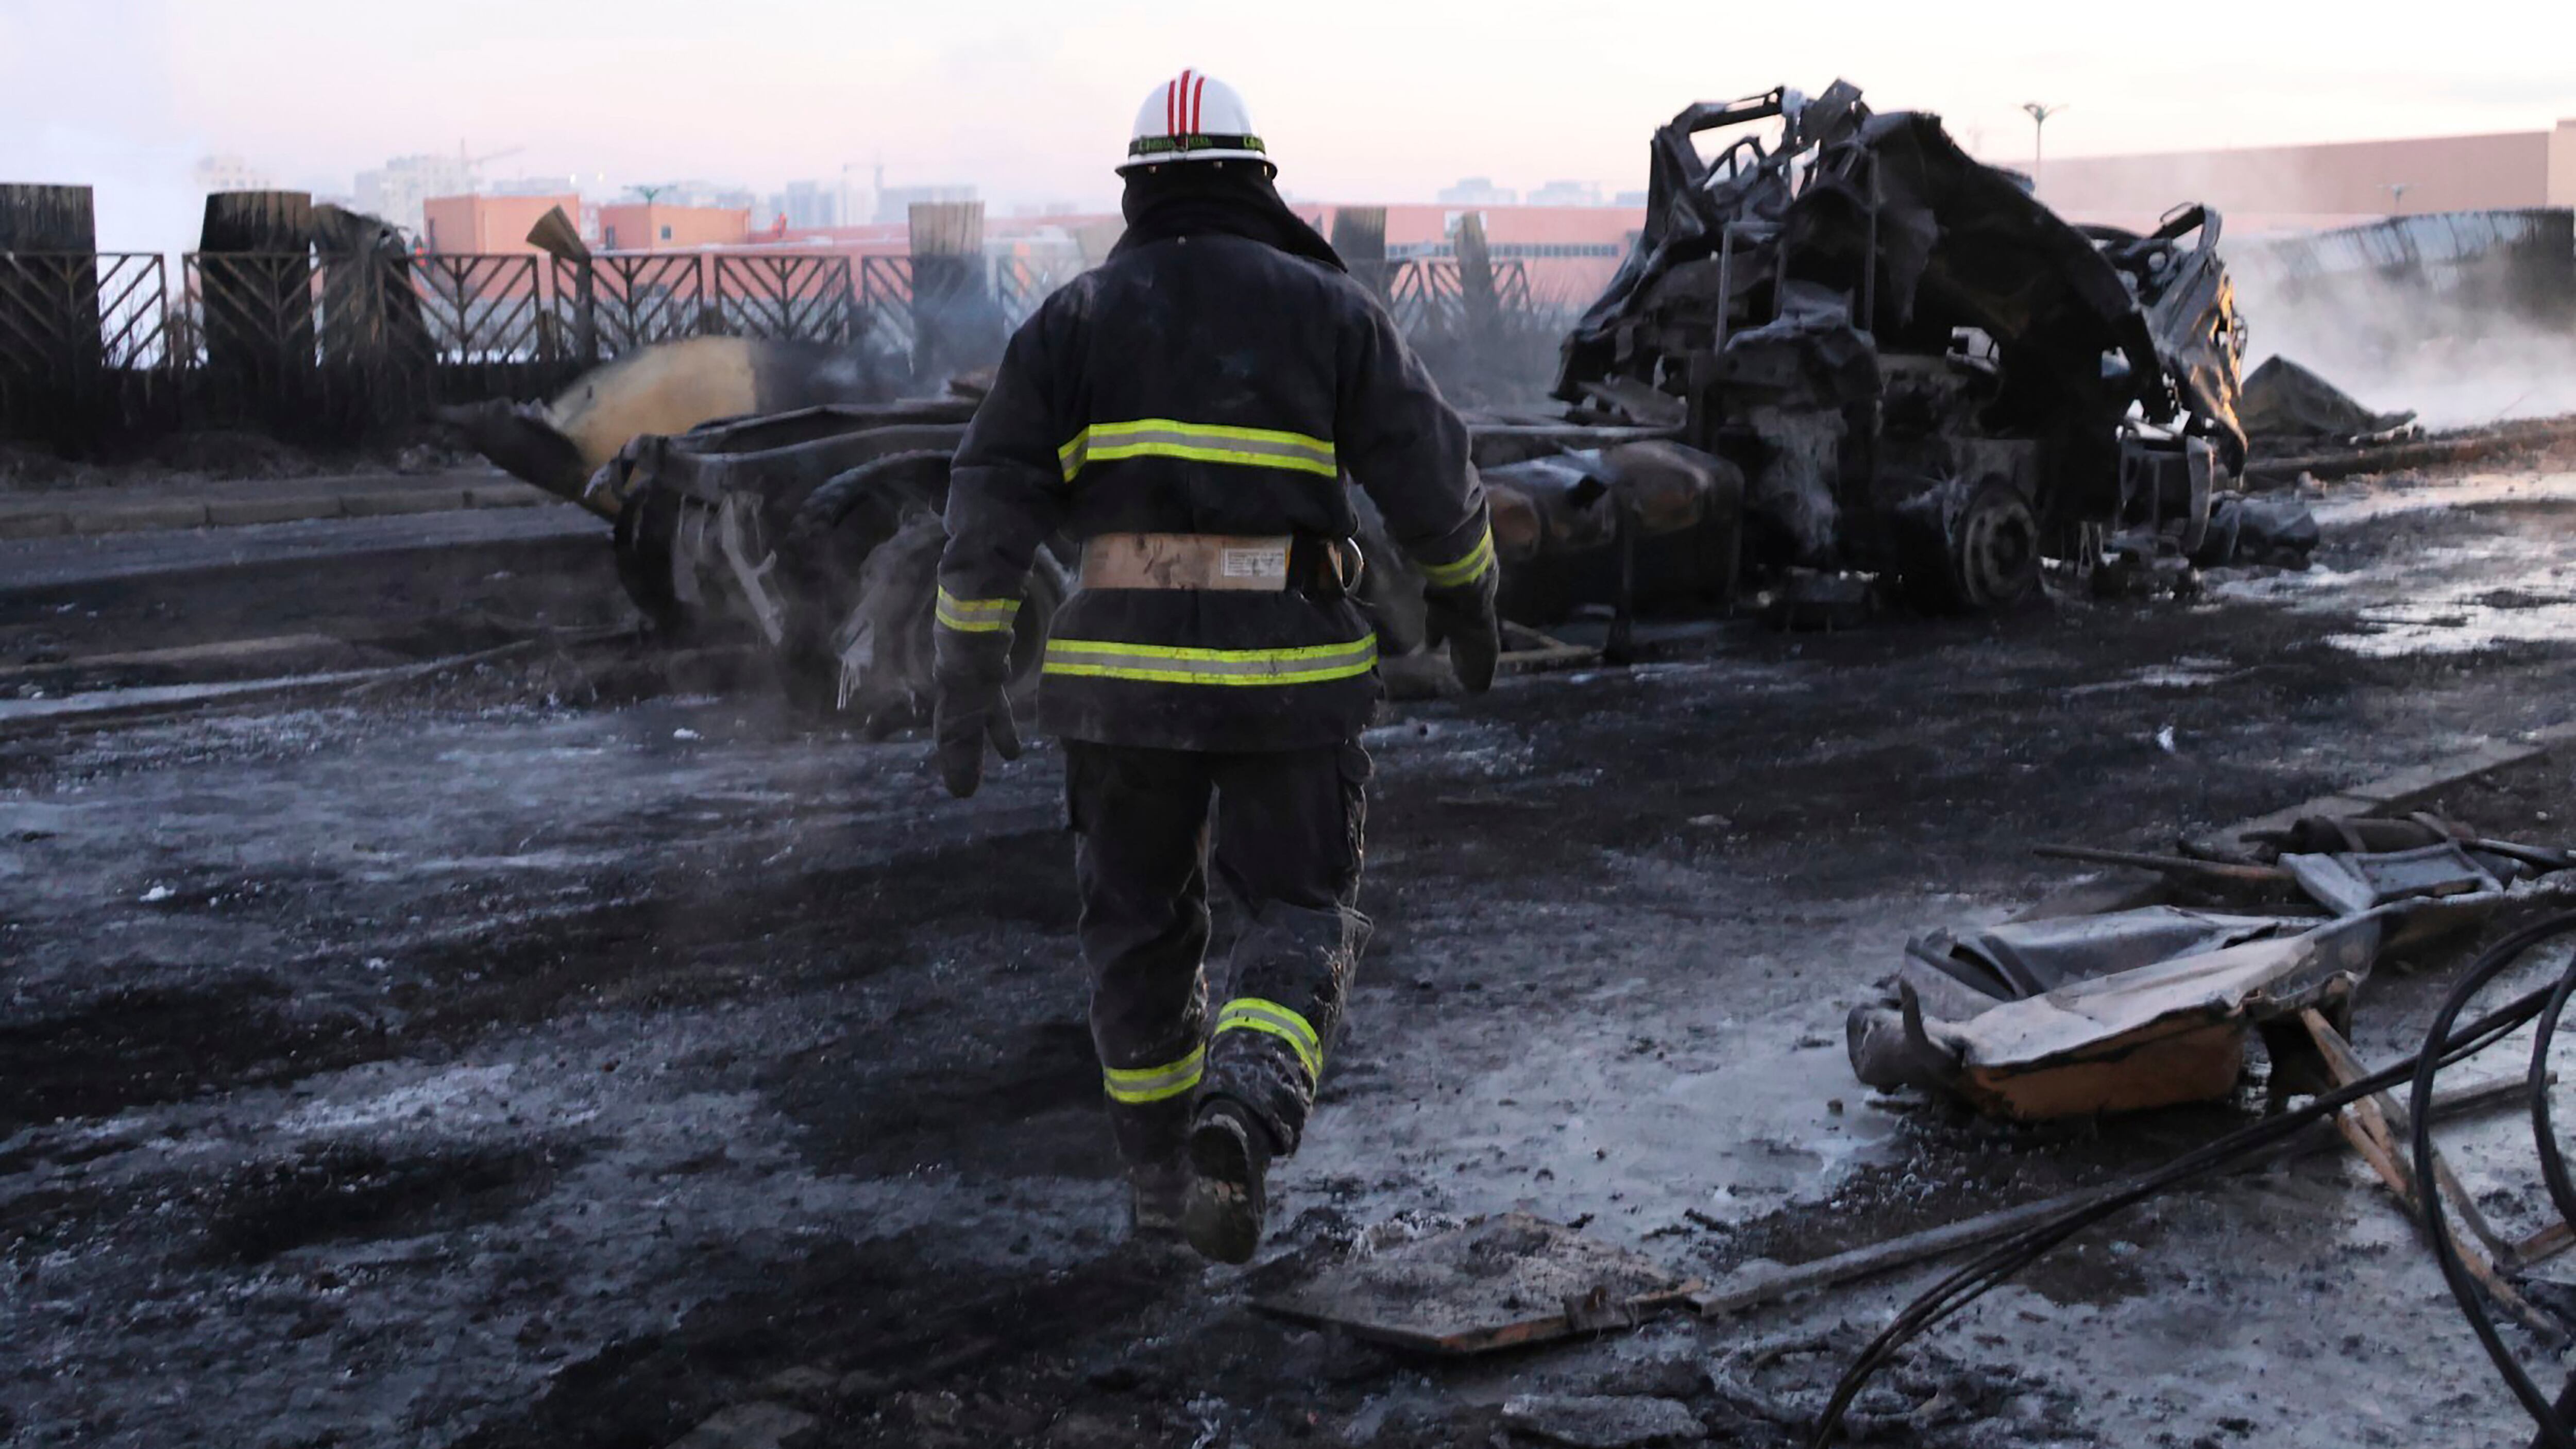 Three firefighters died in the blast (Mongolia National Emergency Management Agency via AP)